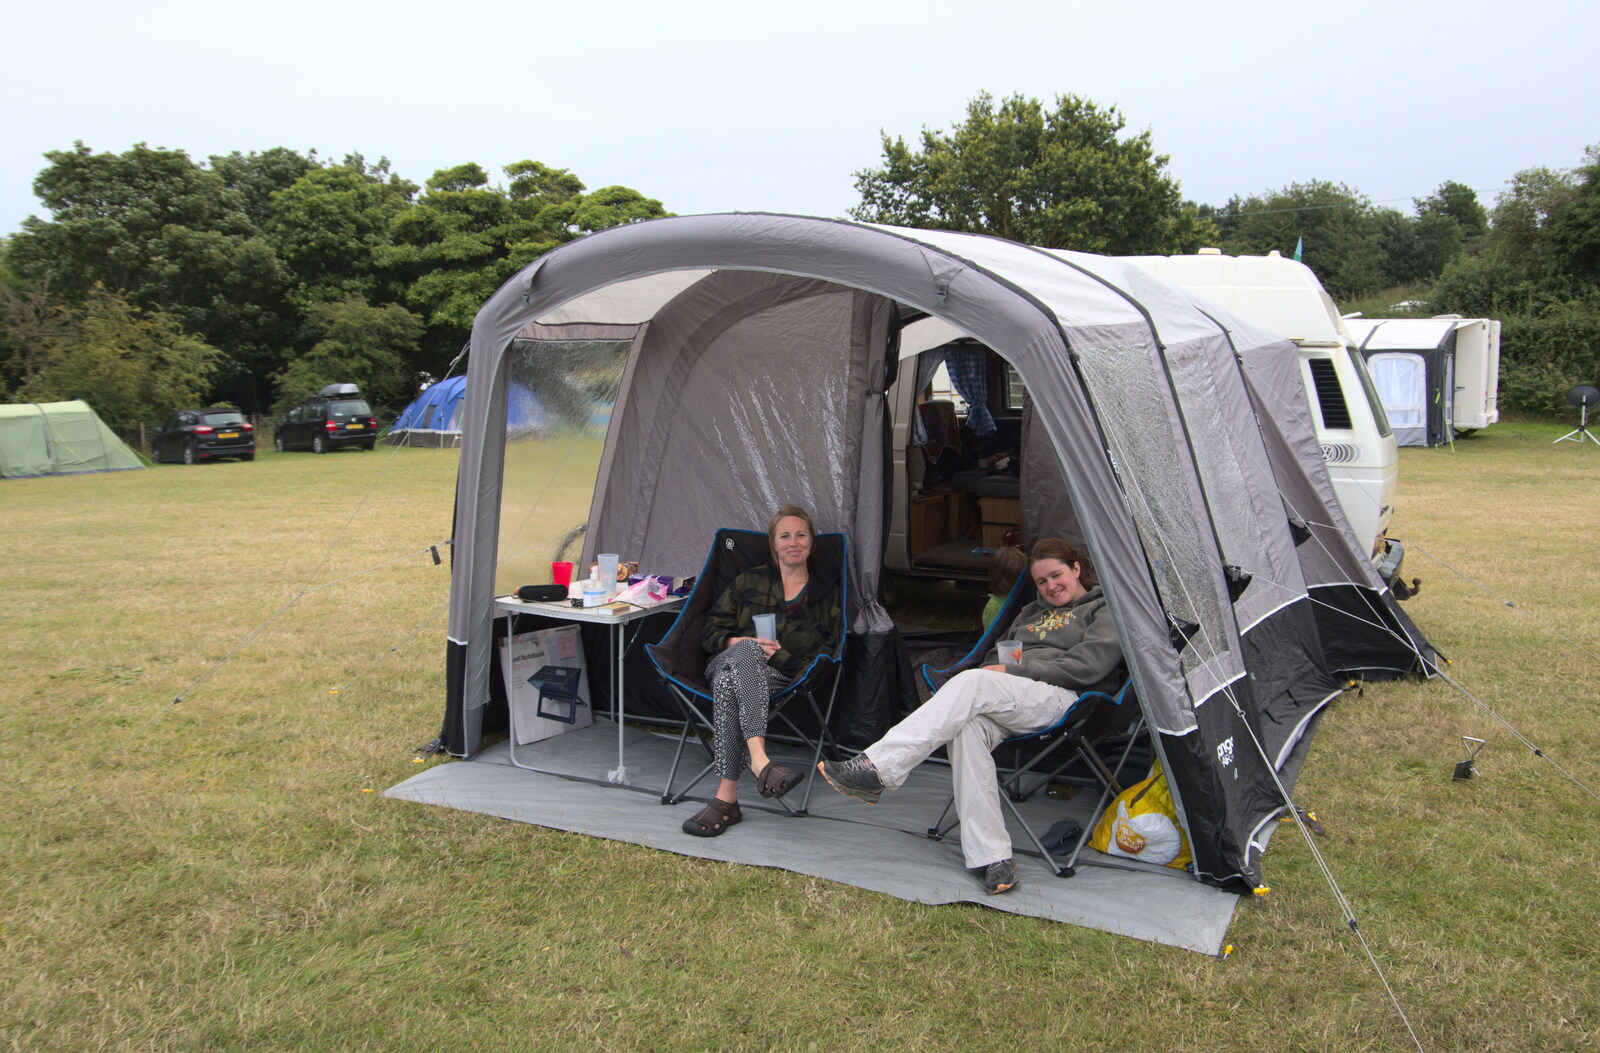 Allyson and Isobel in our awning from Camping on the Coast, East Runton, North Norfolk - 25th July 2020